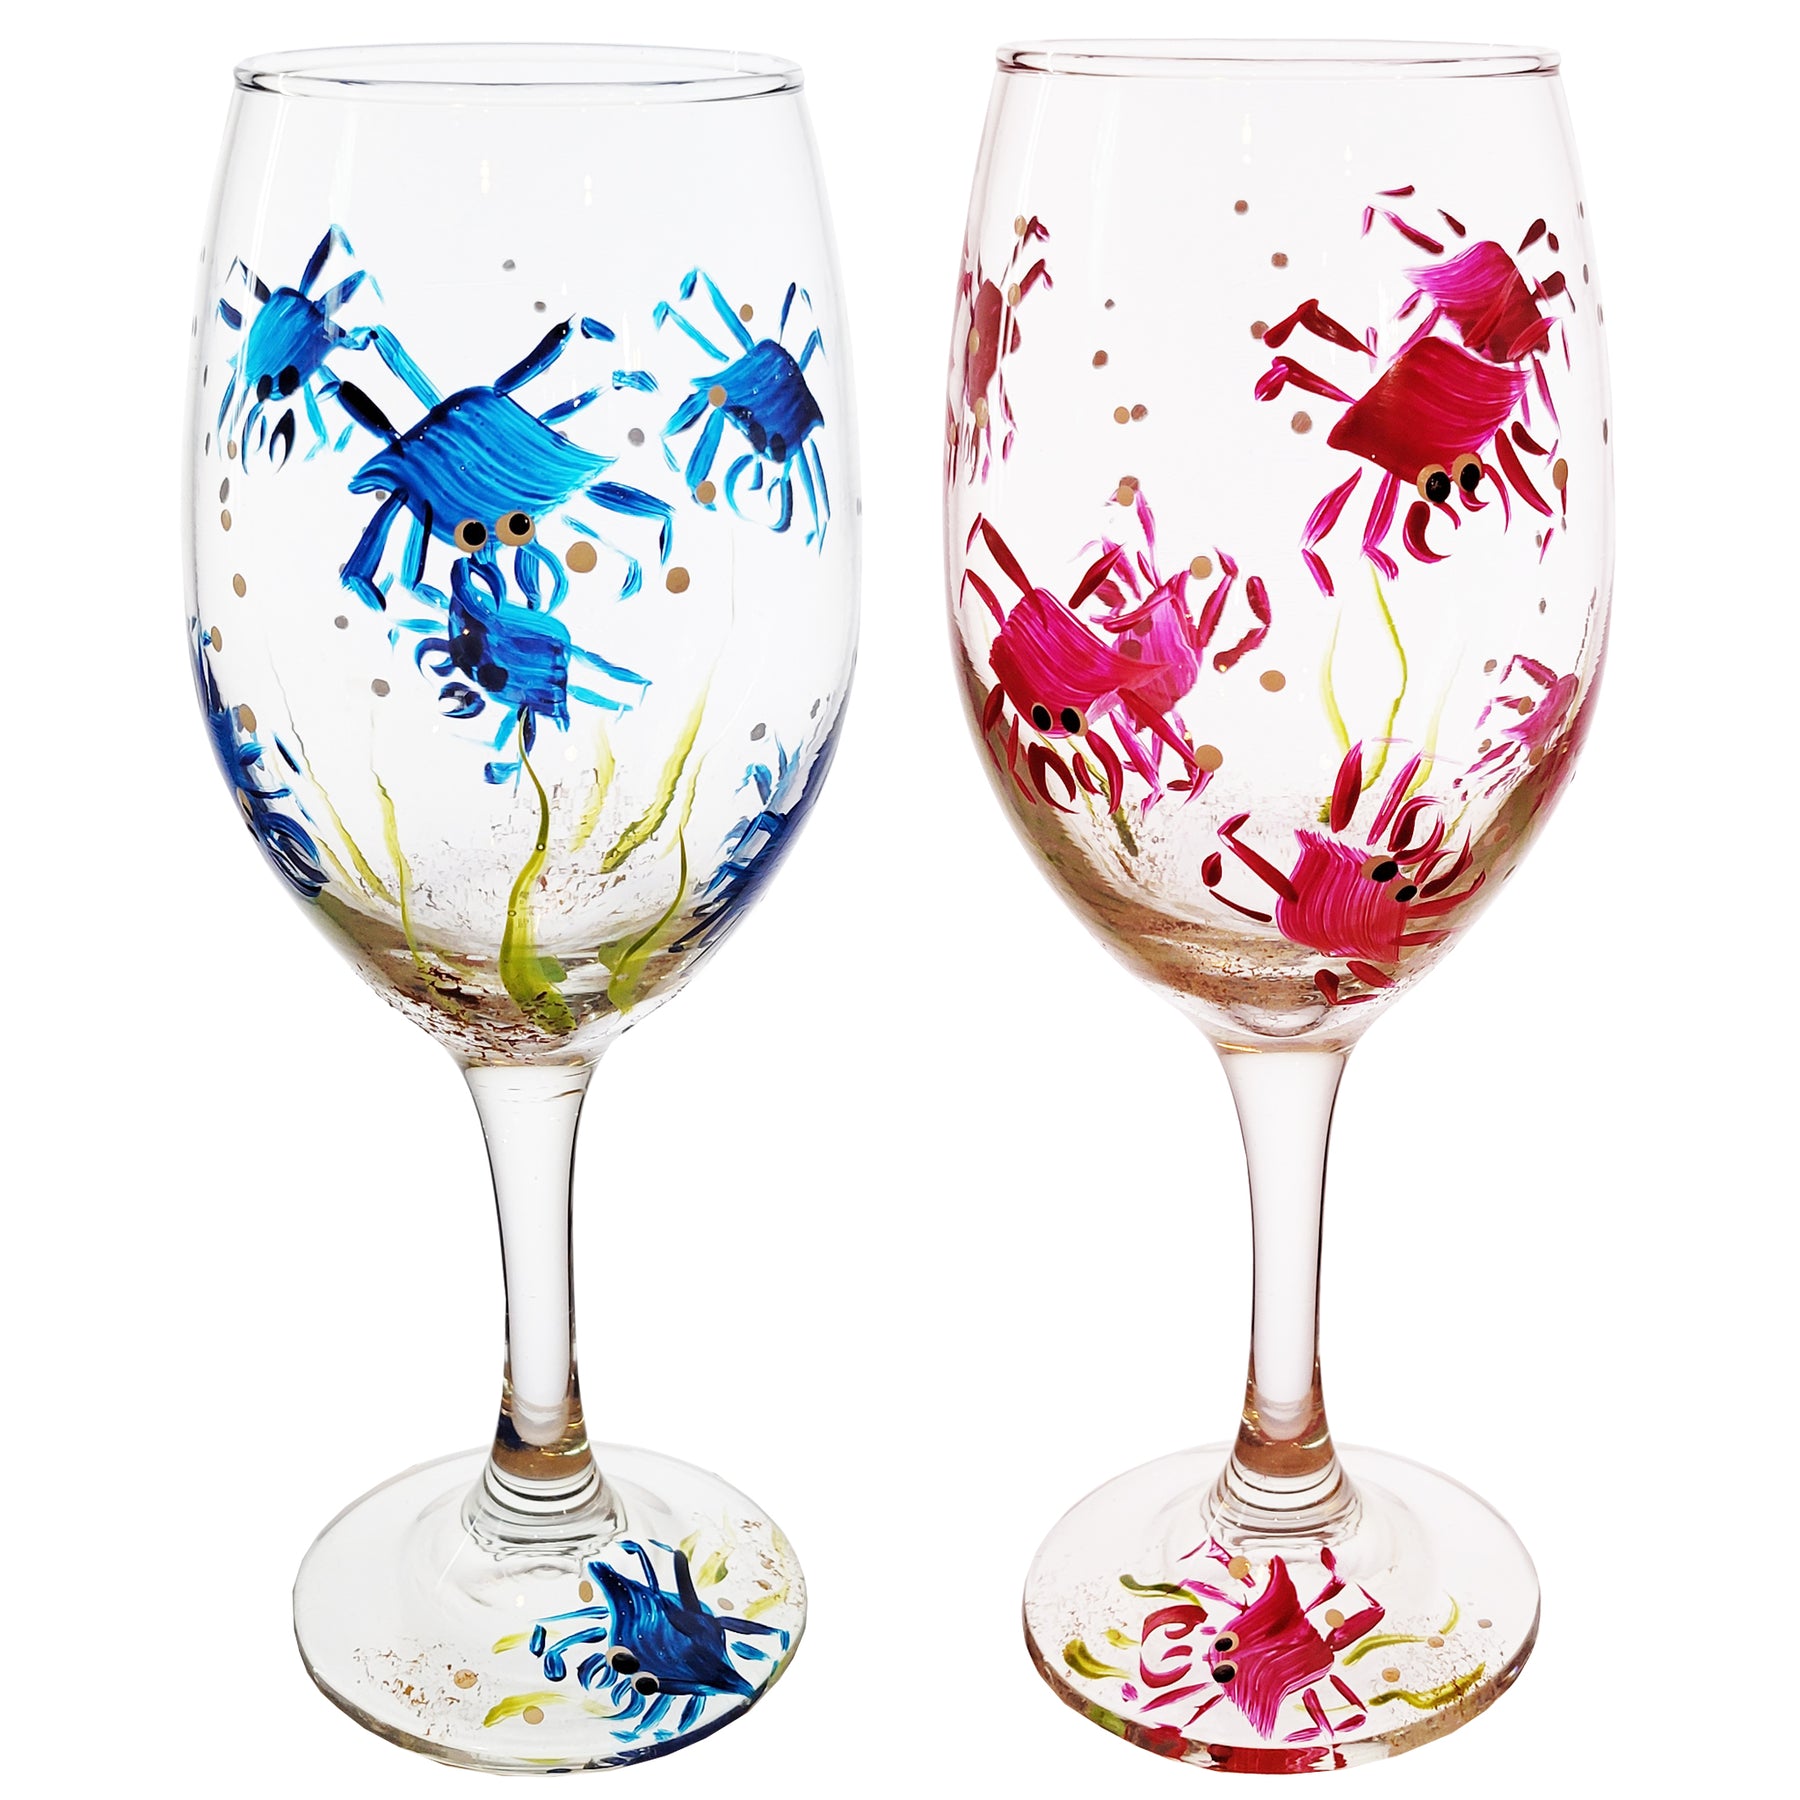 Lobster Wine Glass, Lobster Art, Hand Painted Wine Glass, Maine